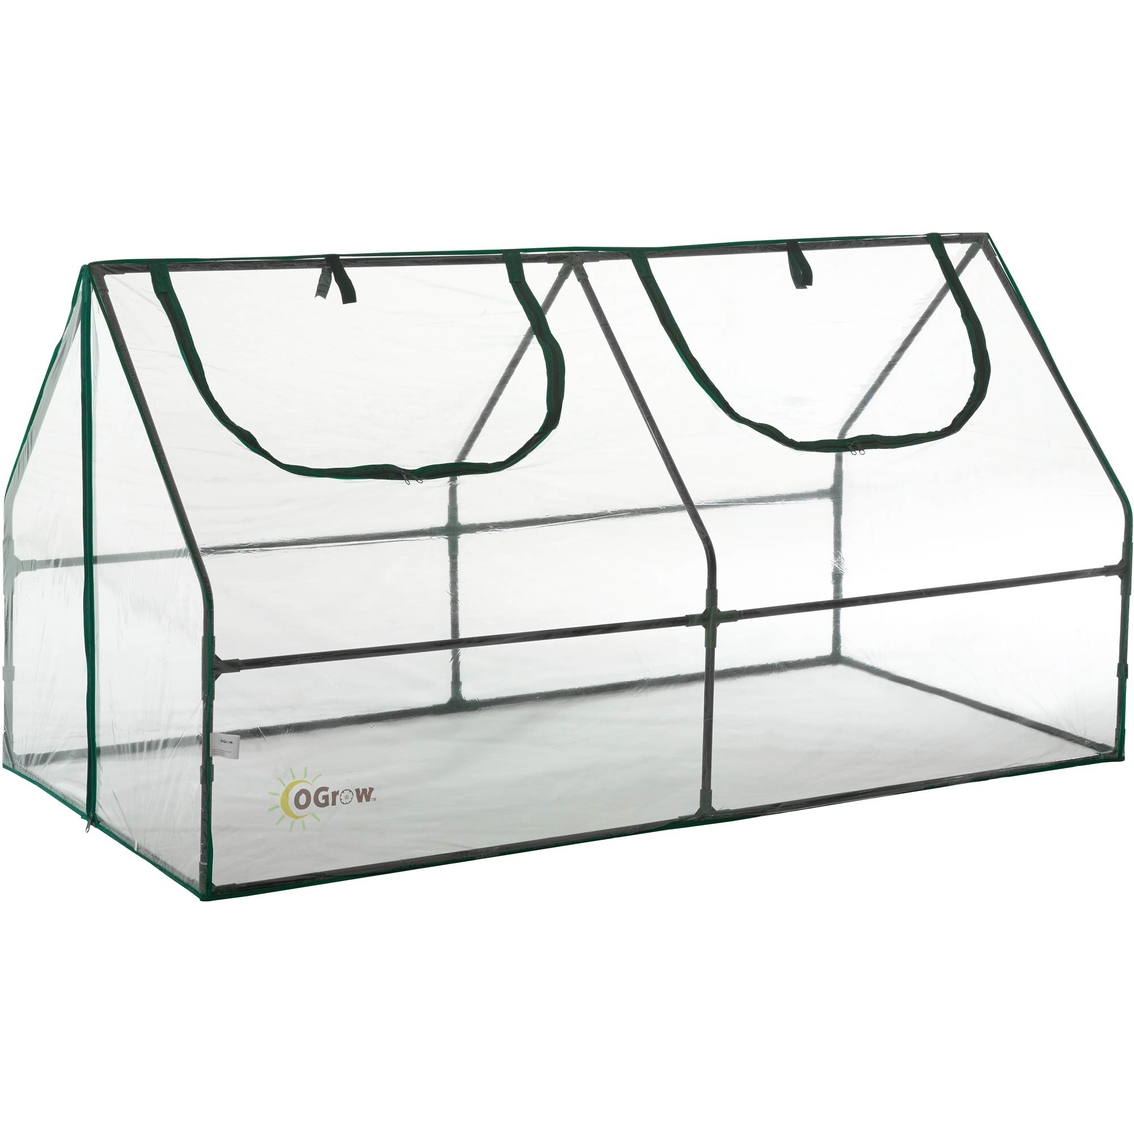 Ogrow Ultra Deluxe Compact Outdoor Seed Starter Greenhouse Cloche 